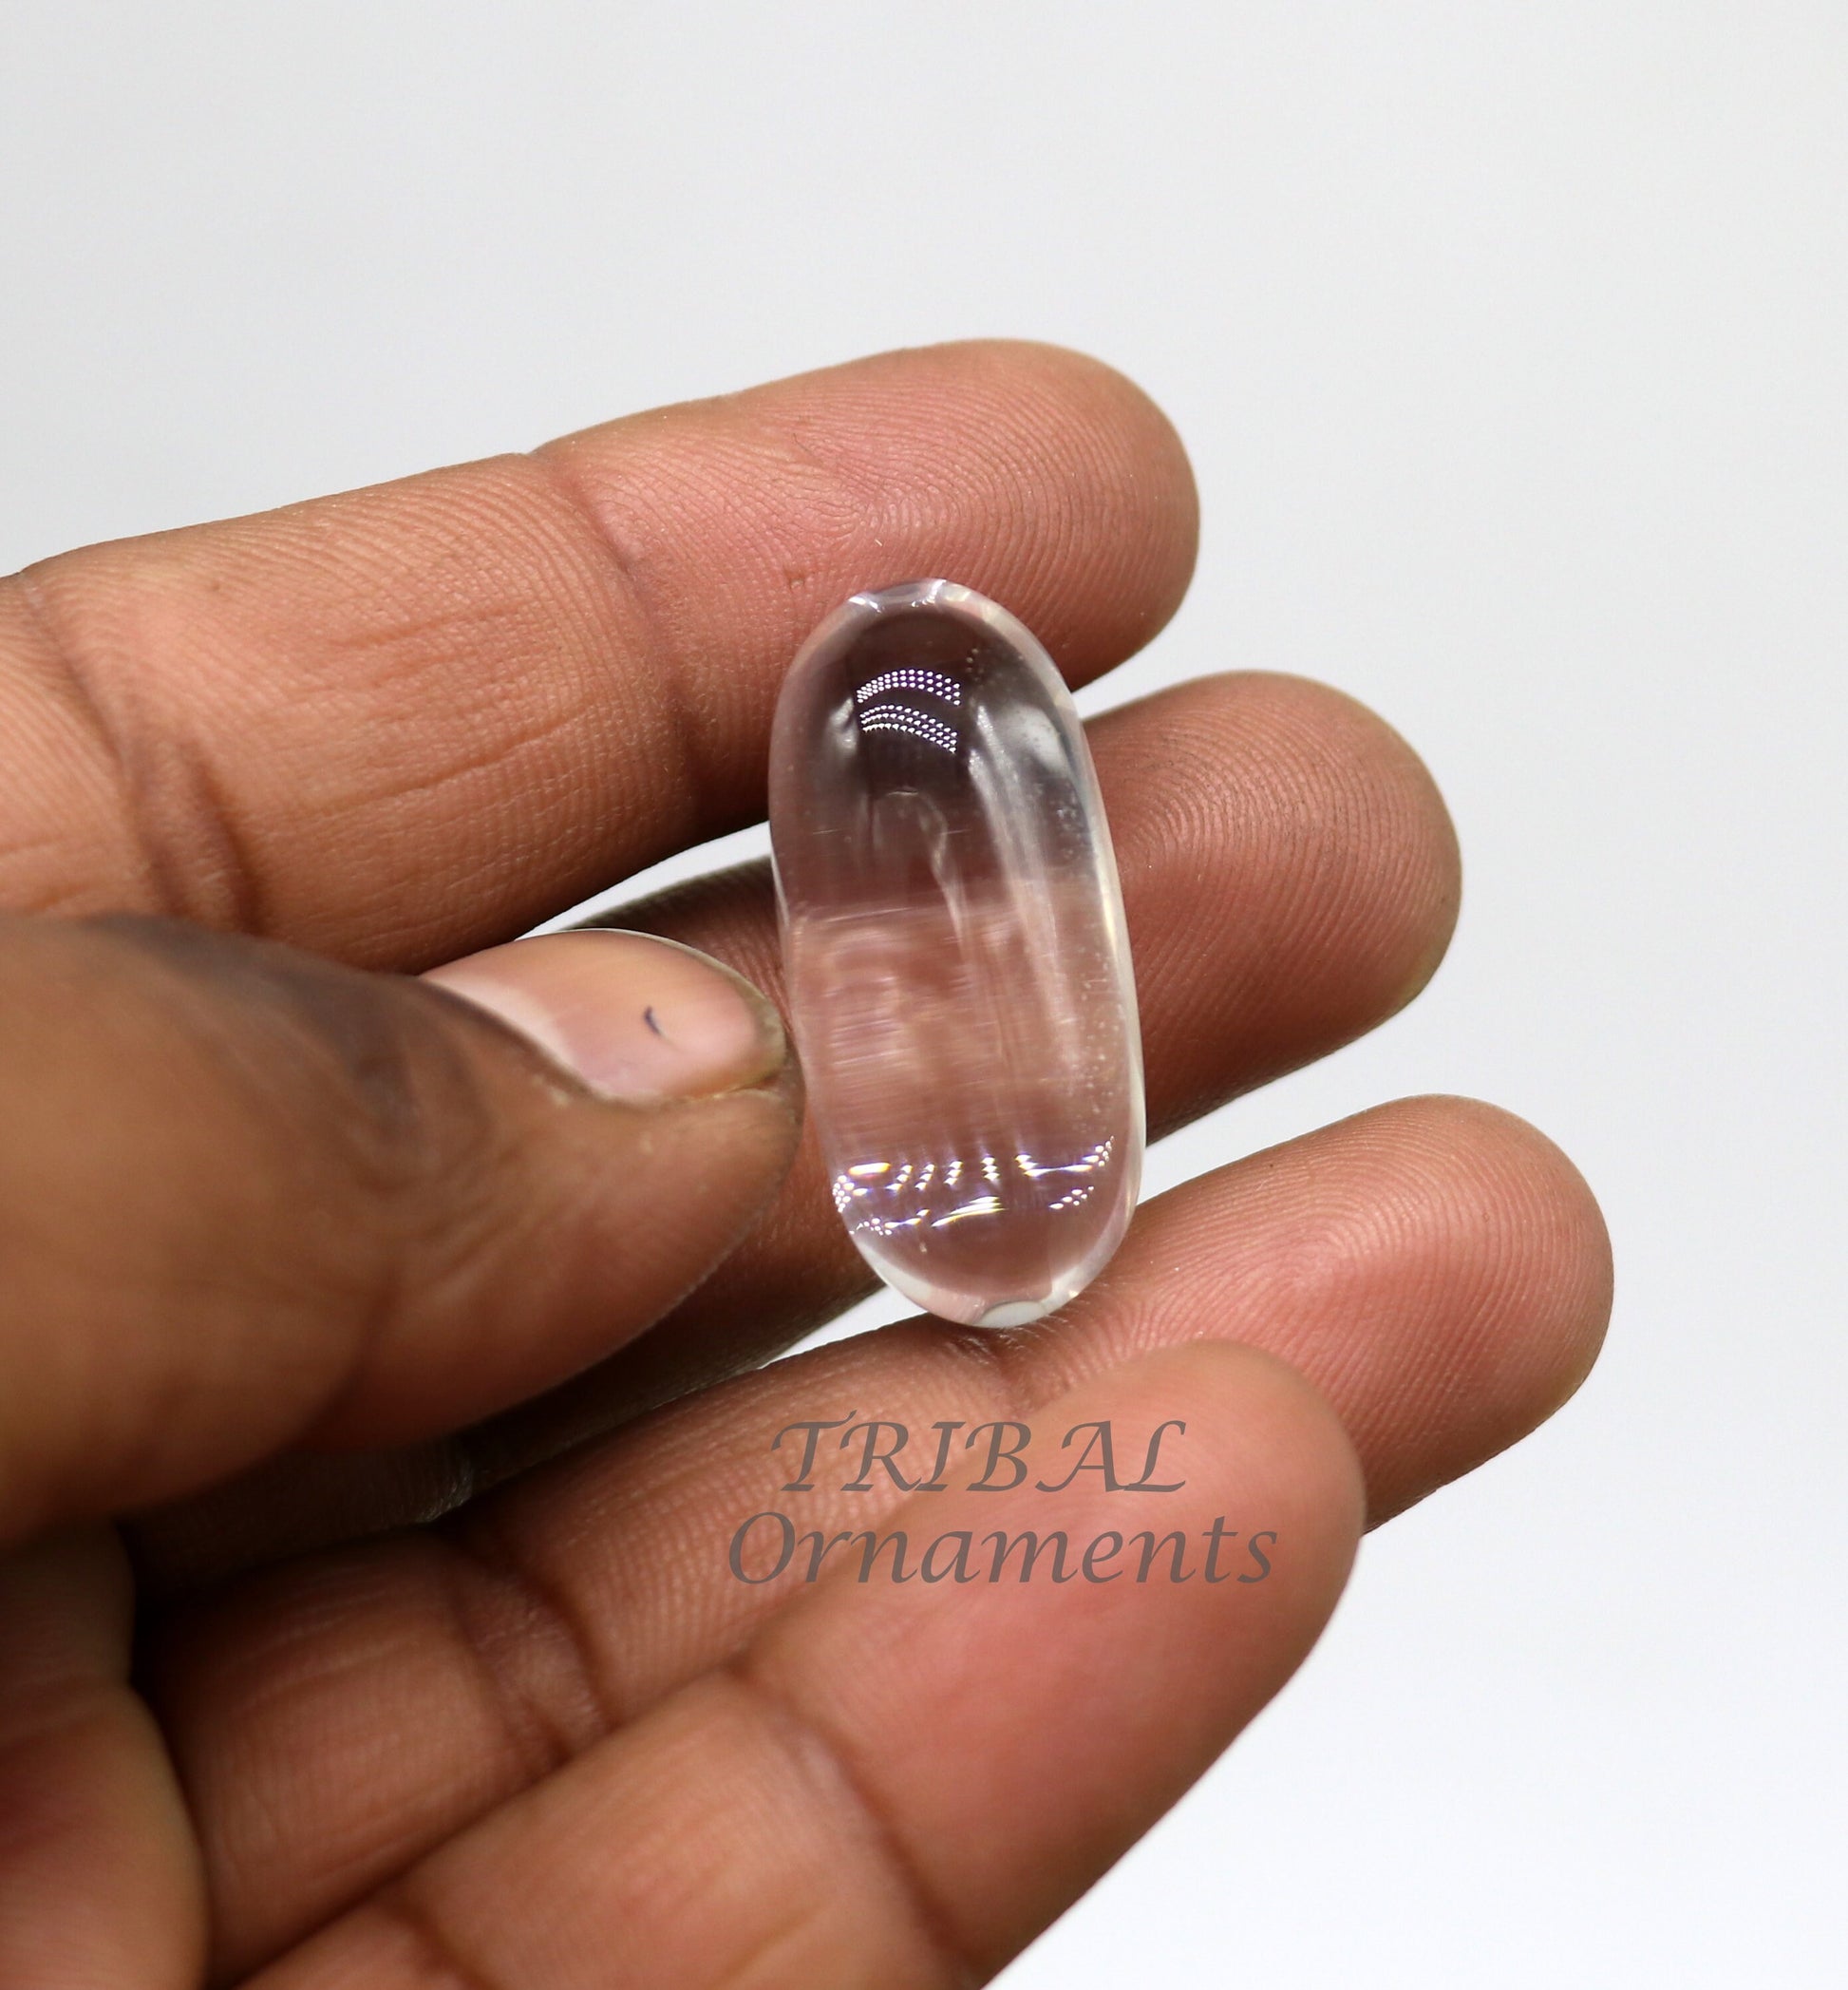 Divine Natural sphatik crystal stone divine lord shiva lingam statue, amazing sphatik lingam puja article for wealth and prosperity stna25 - TRIBAL ORNAMENTS